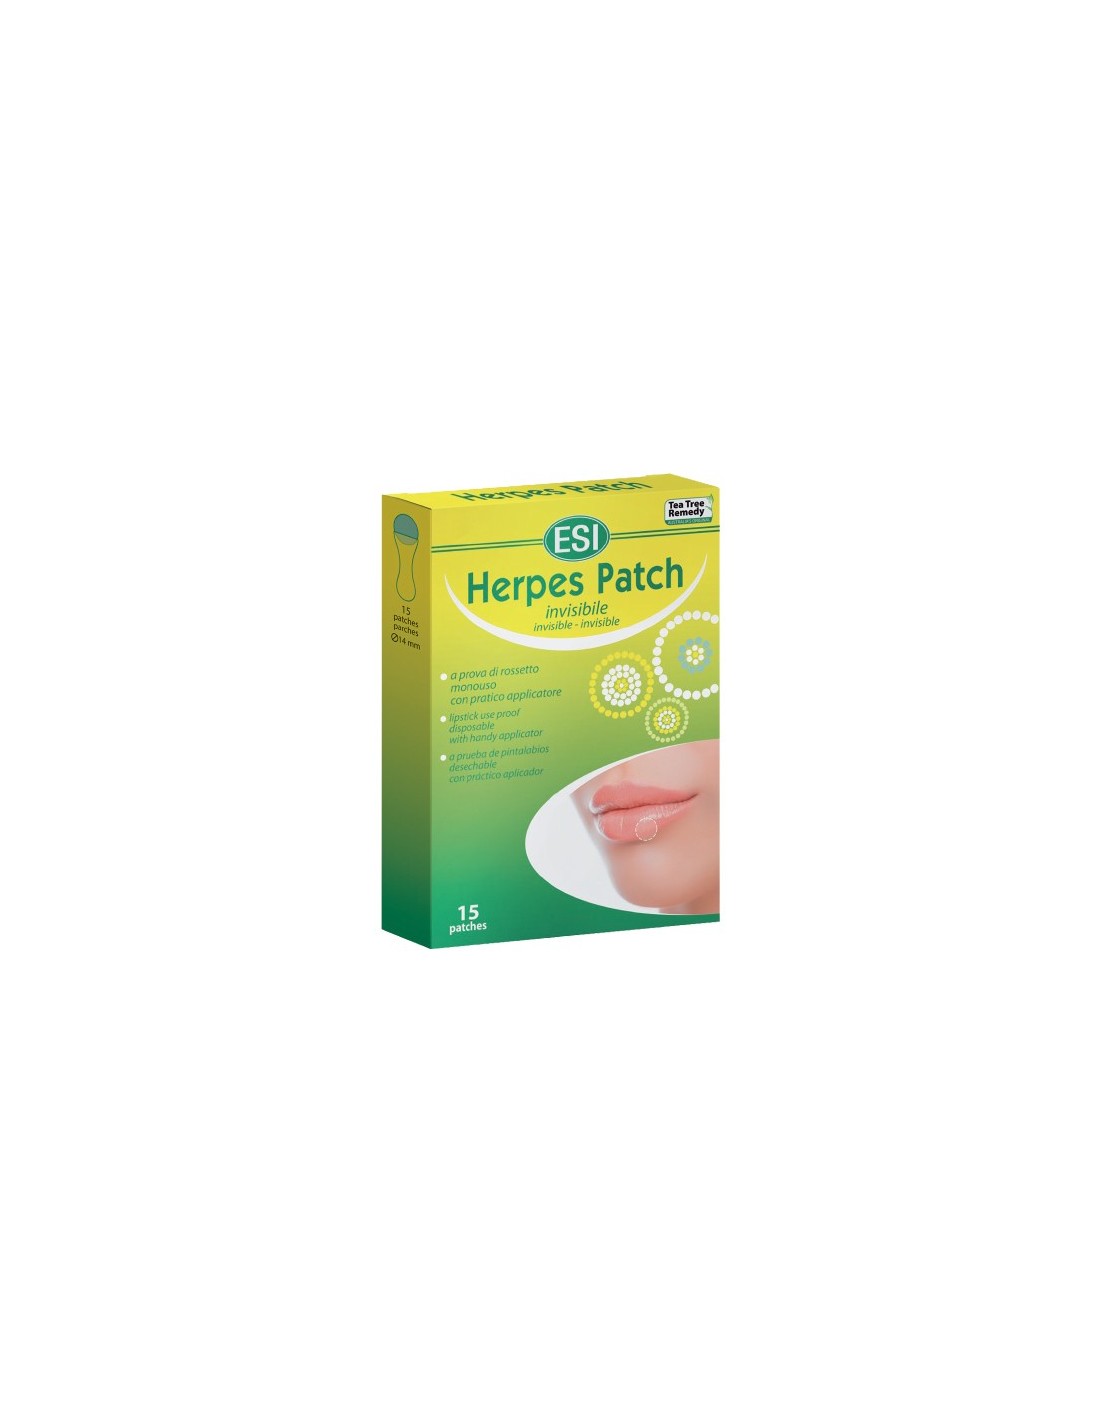 Esi Herpes Patch 15 Parches